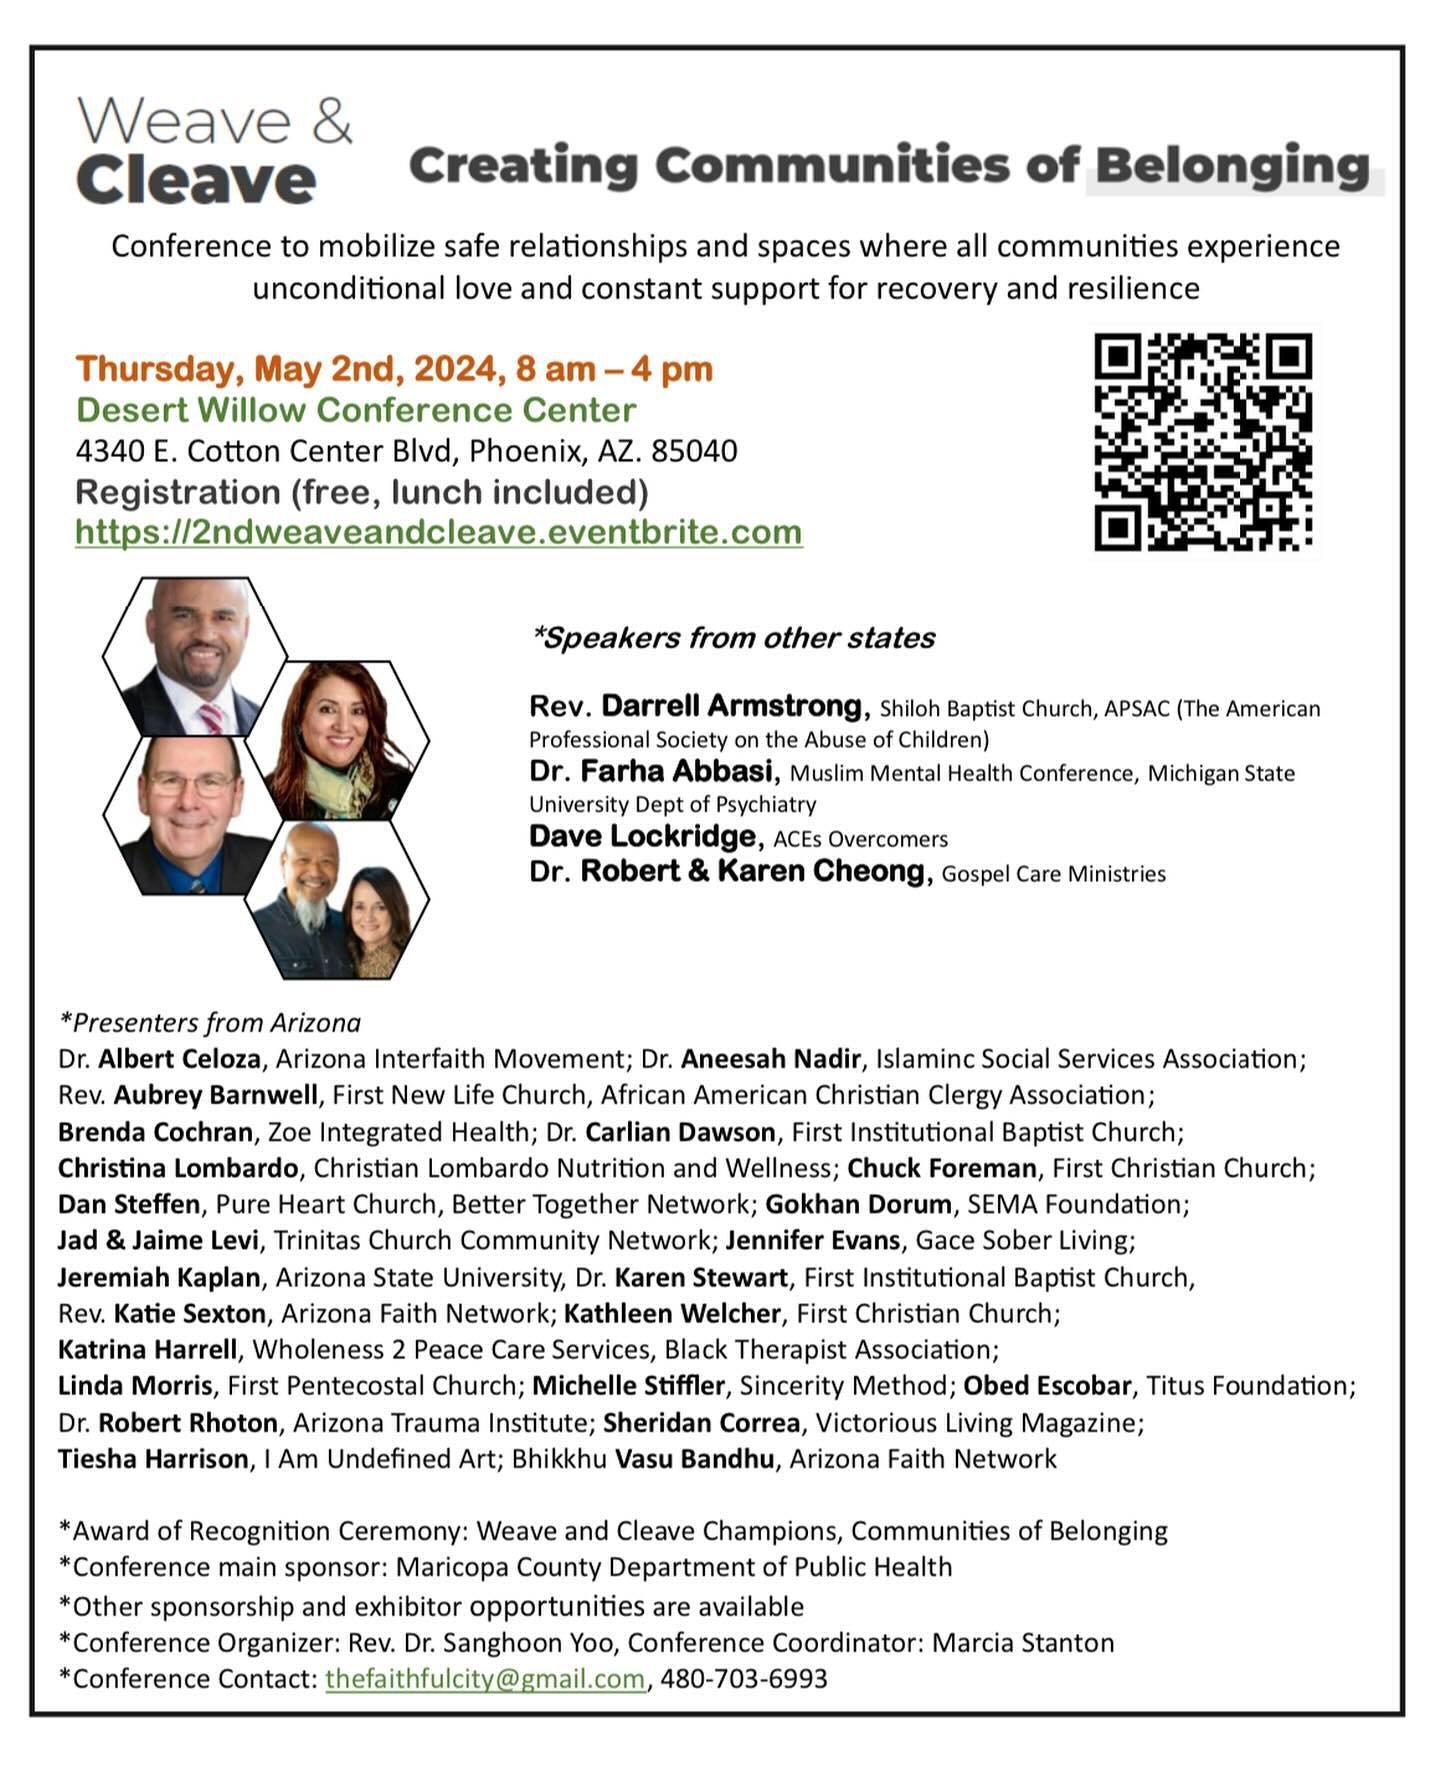 Weave and Cleave Conference Registration 
(May 2nd, 8 am - 4 pm, free of charge, lunch served): 
https://2ndweaveandcleave.eventbrite.com